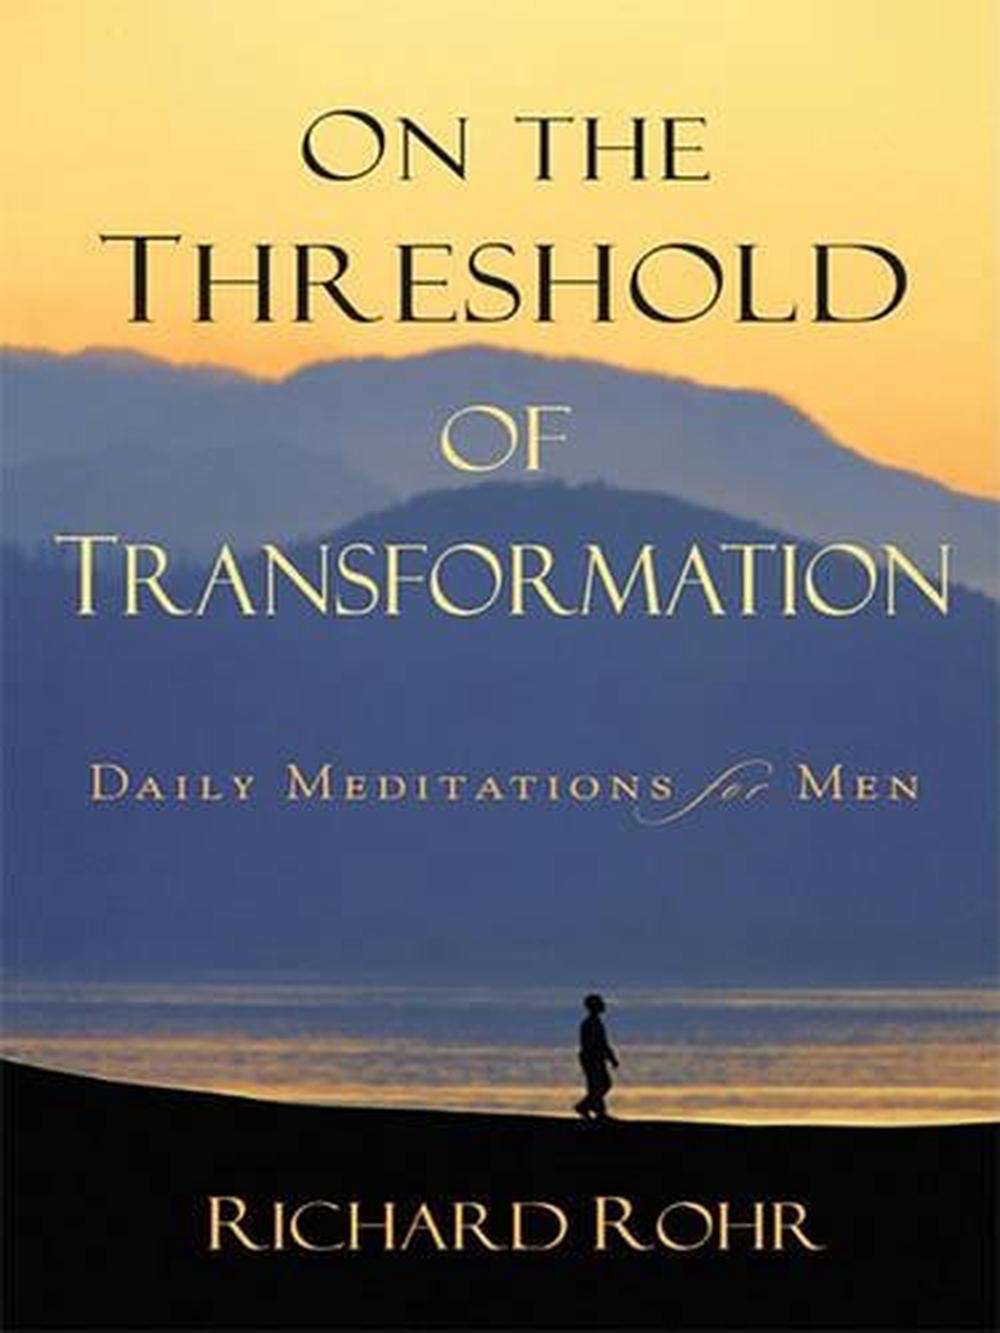 On the Threshold of Transformation Daily Meditations for Men by